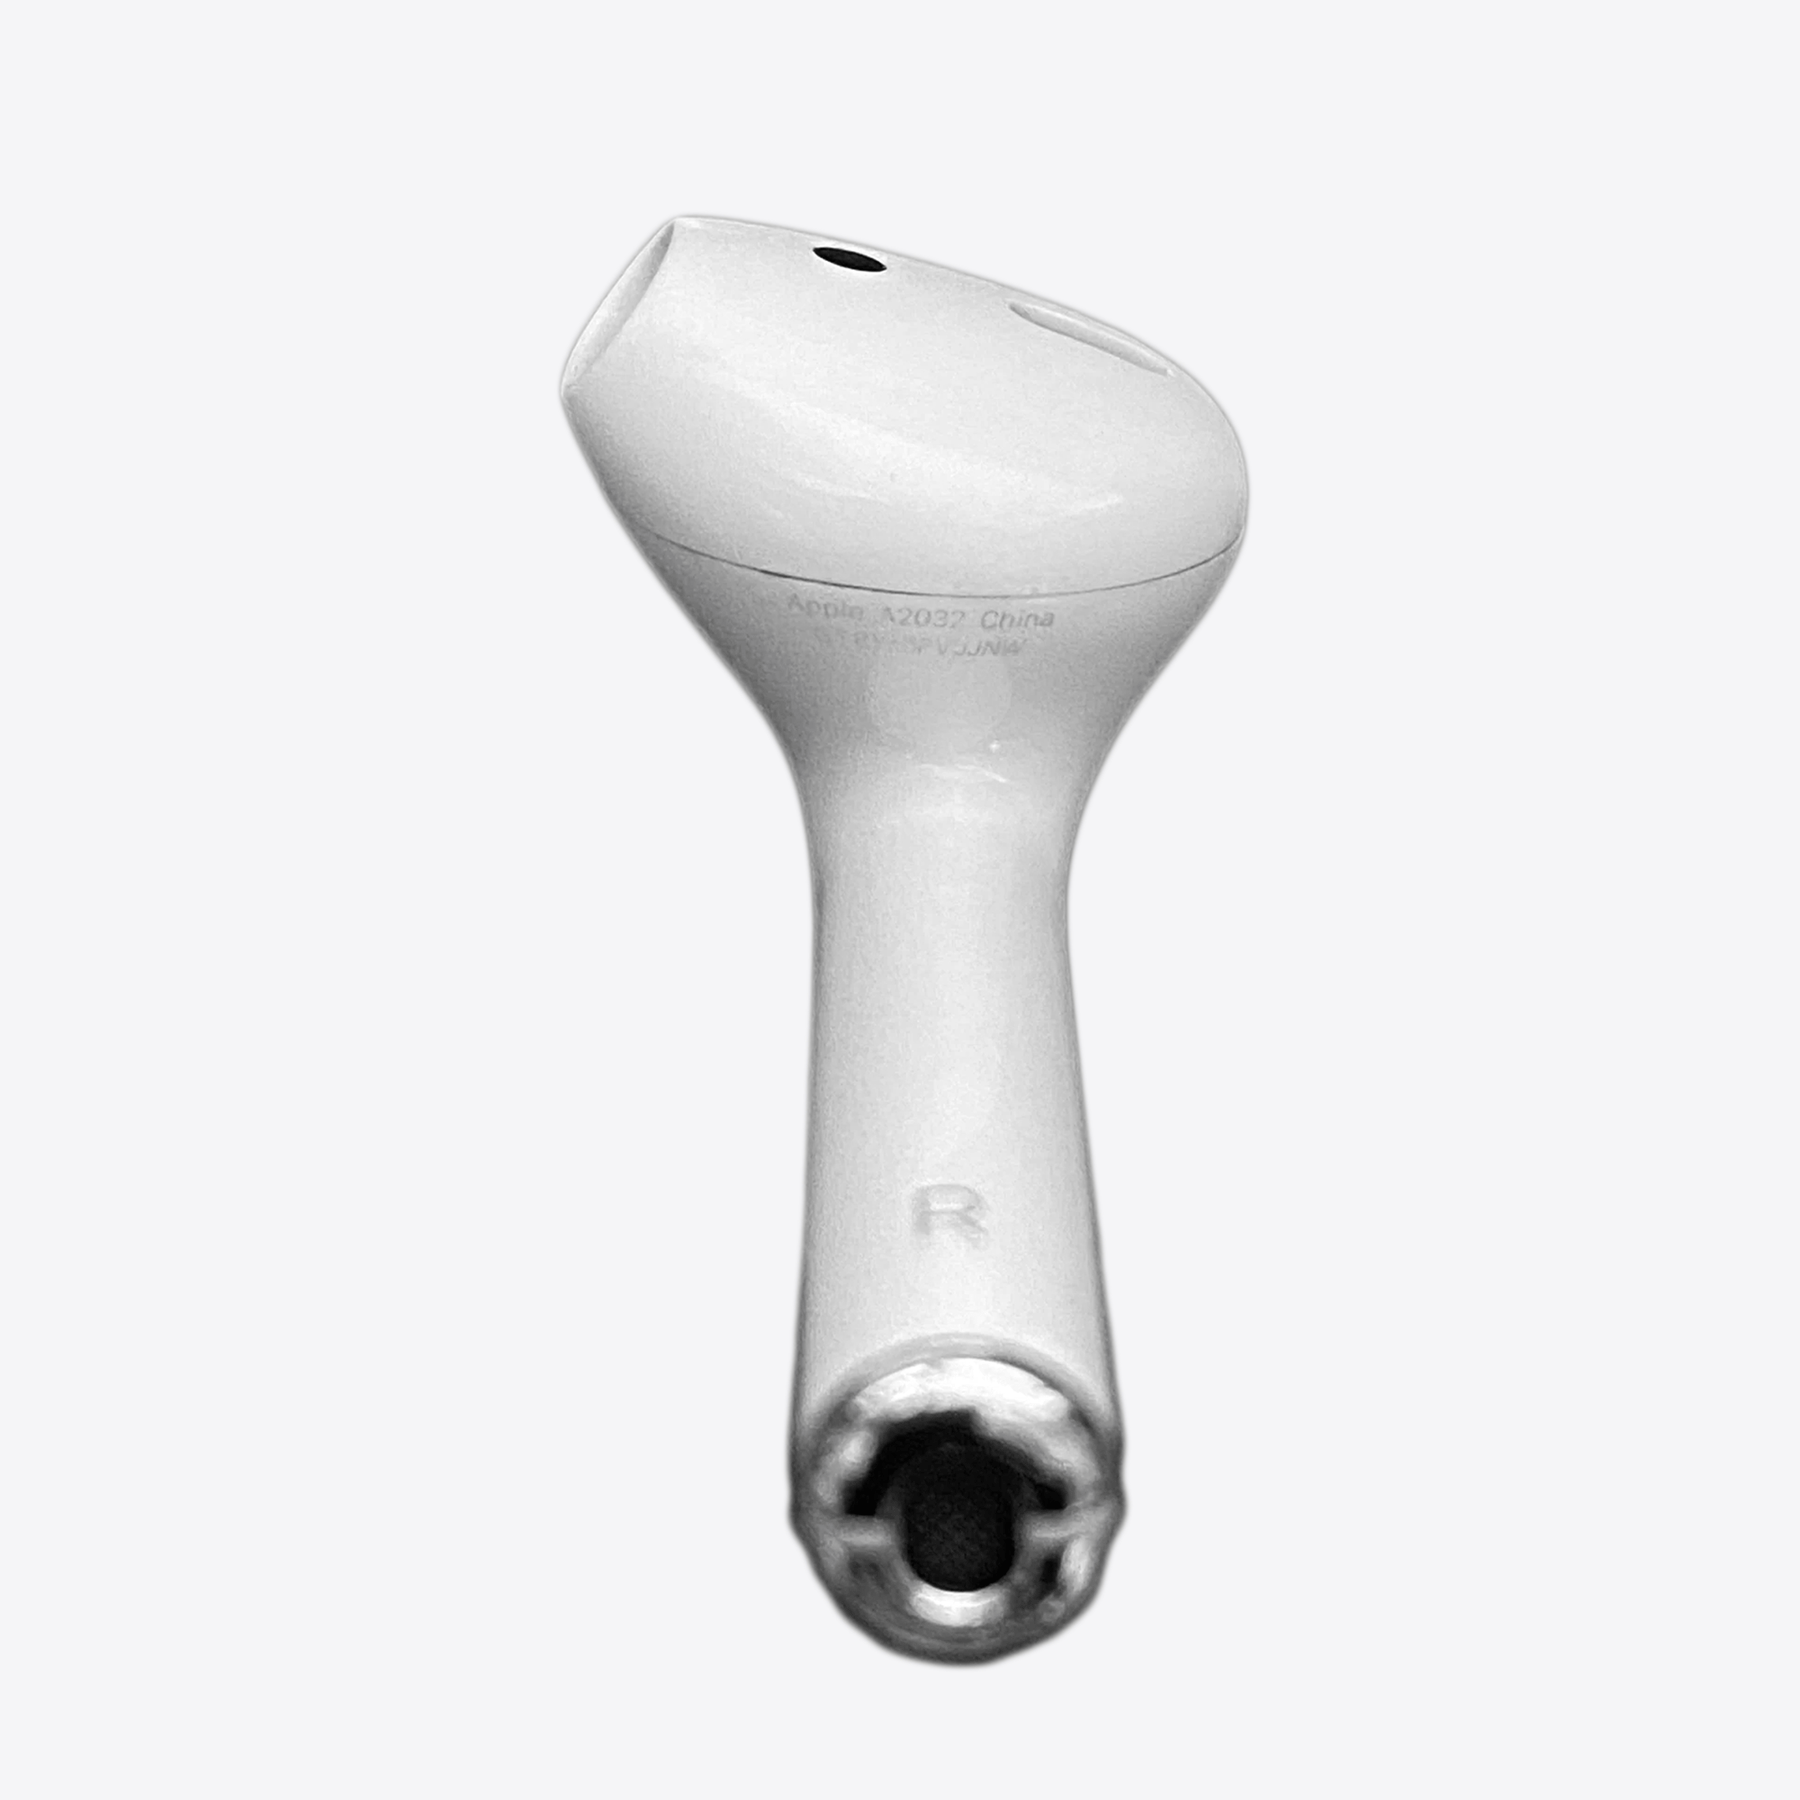 SONS/: Apple Airpods 2 - A2032 Blanc - Reconditionné Grade B